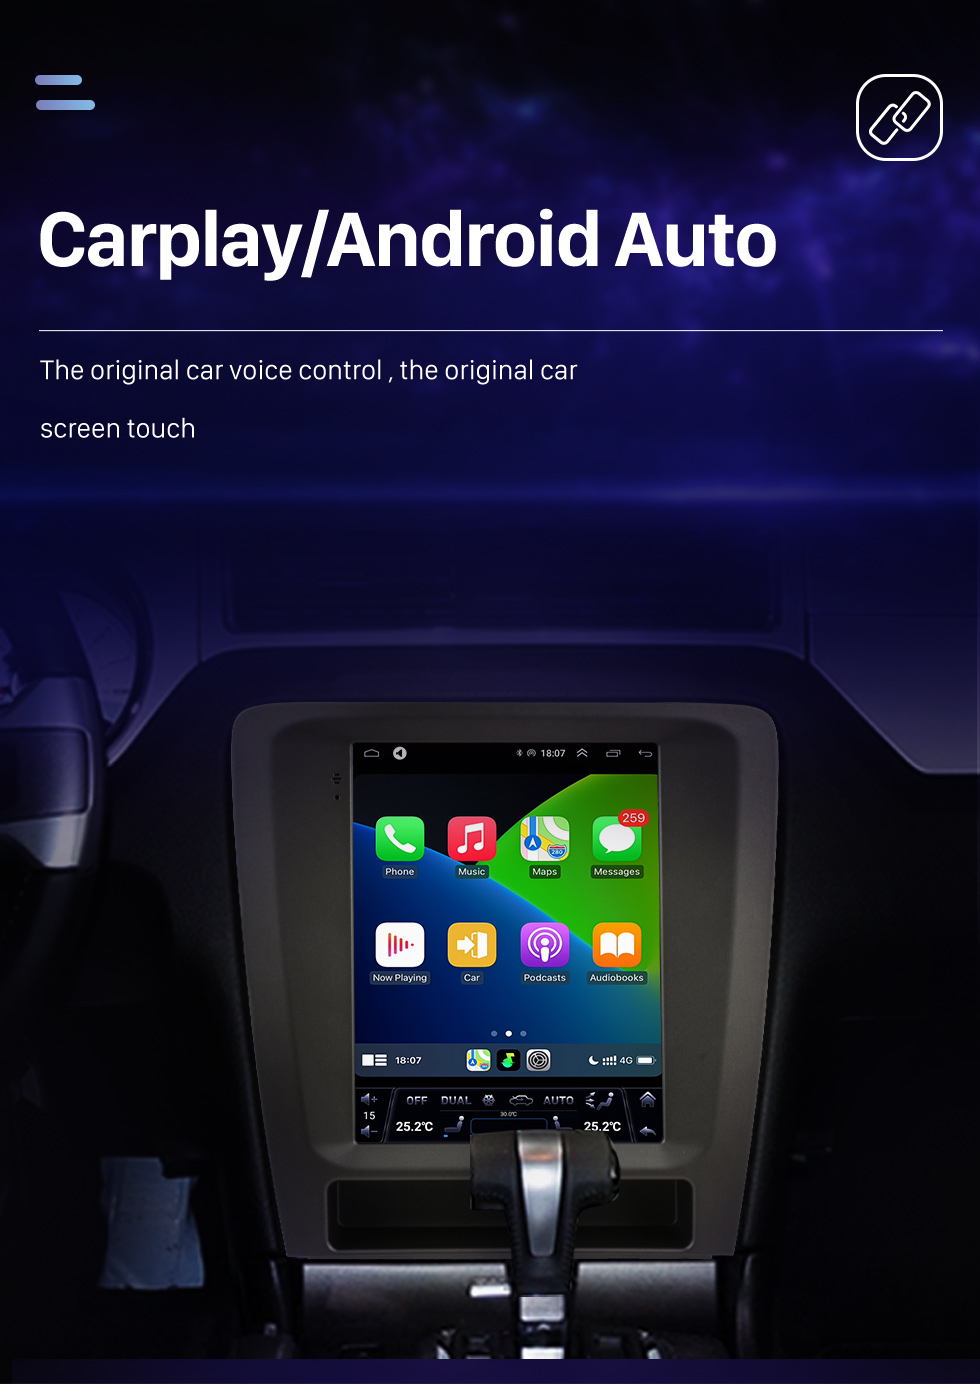 Seicane Carplay OEM 9,7 Zoll Android 10.0 für 2013-2014 Ford Mustang Radio Android Auto GPS Navigationssystem mit HD Touchscreen Bluetooth Unterstützung OBD2 DVR